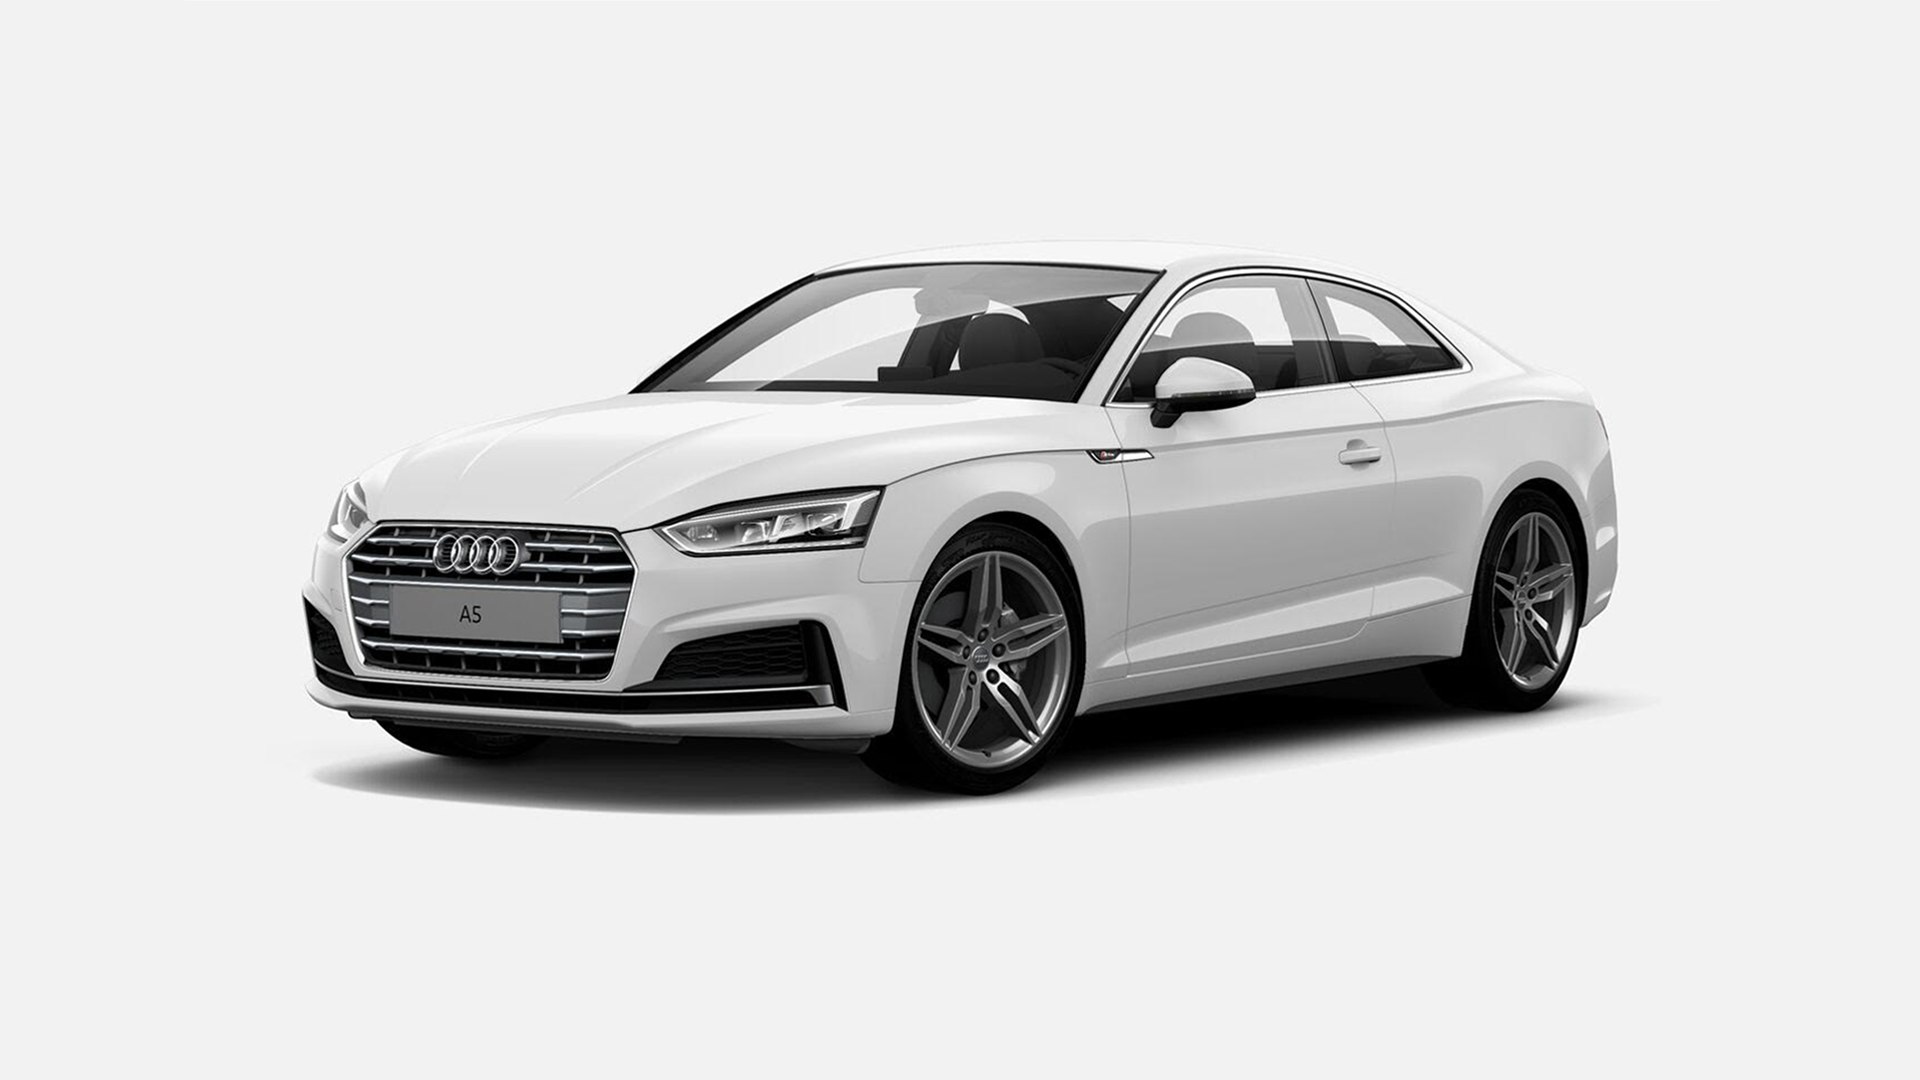 Exterior of the 2018 Audi A5 Coupe 